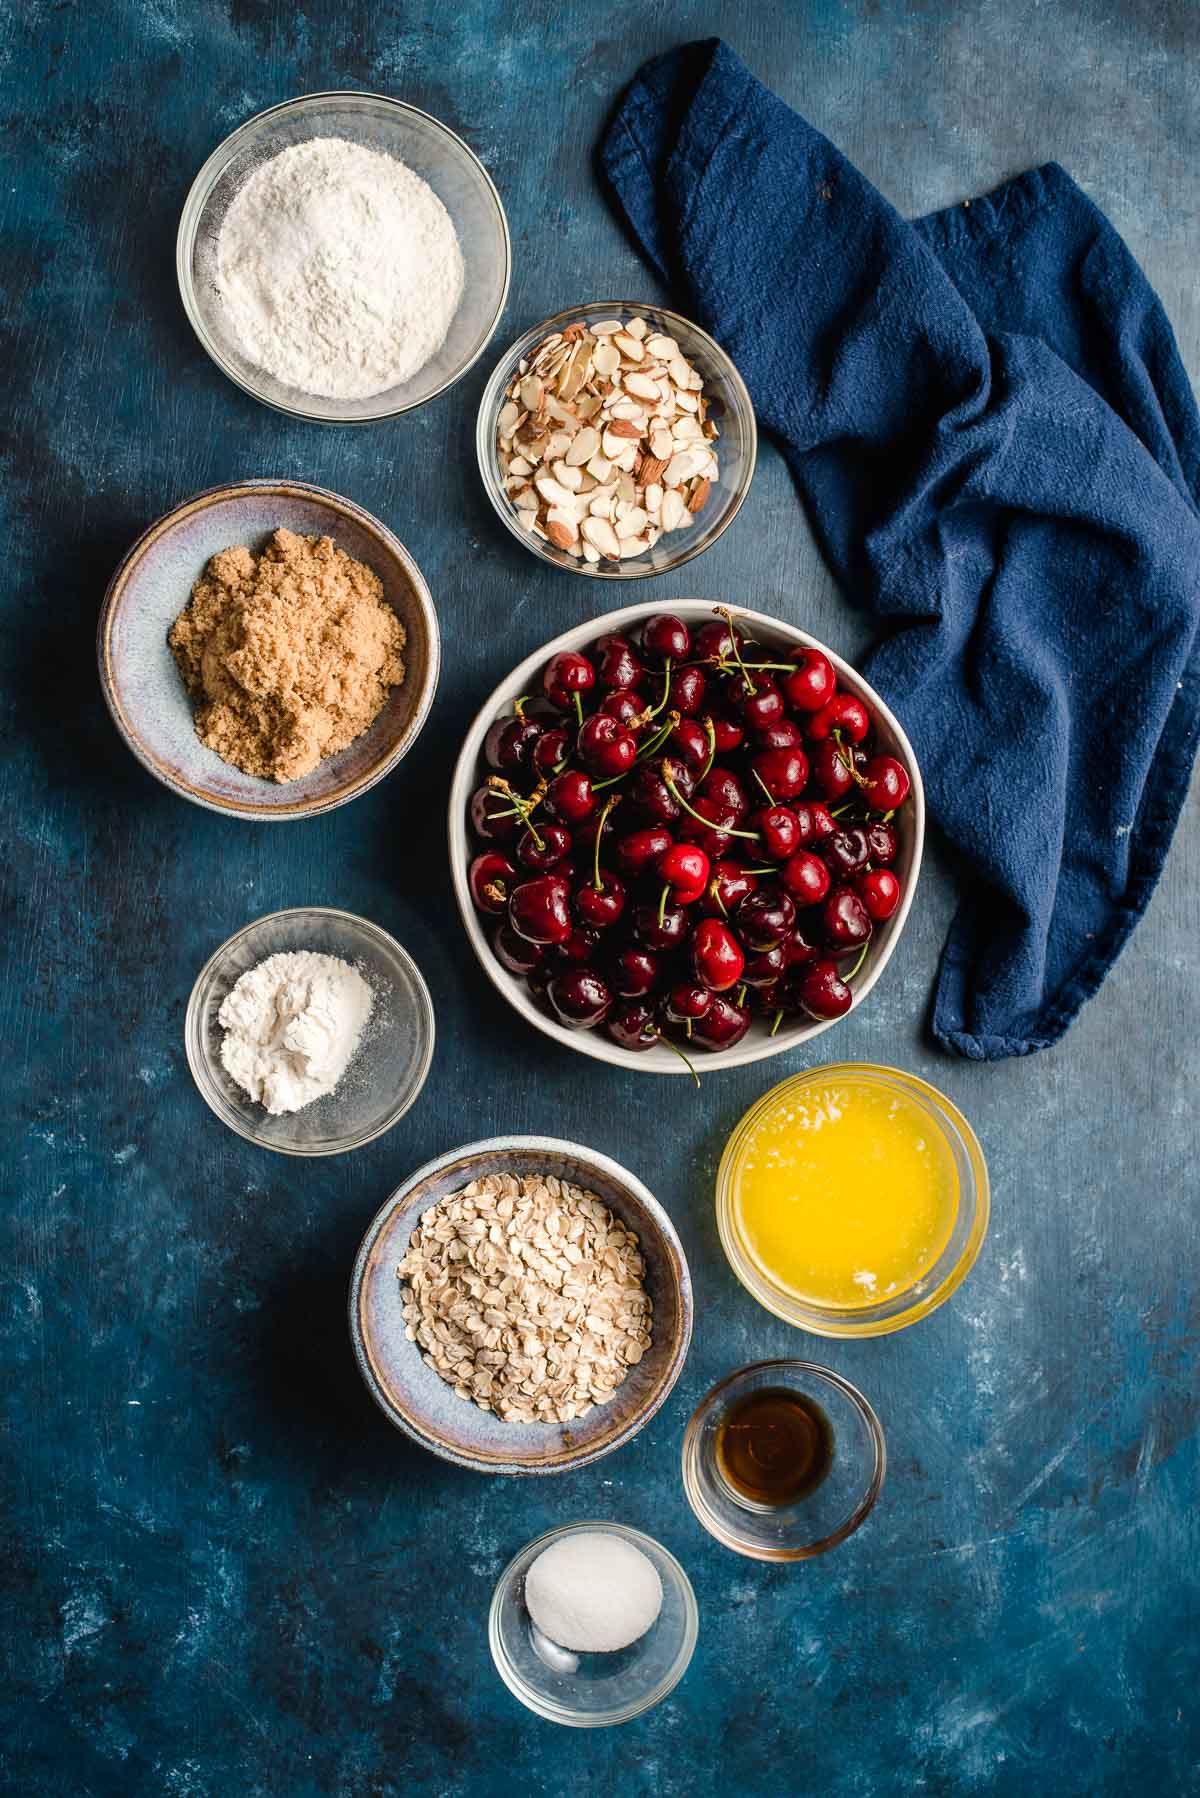 Ingredients for fresh cherry crumble displayed in prep bowls on a undecorous background.